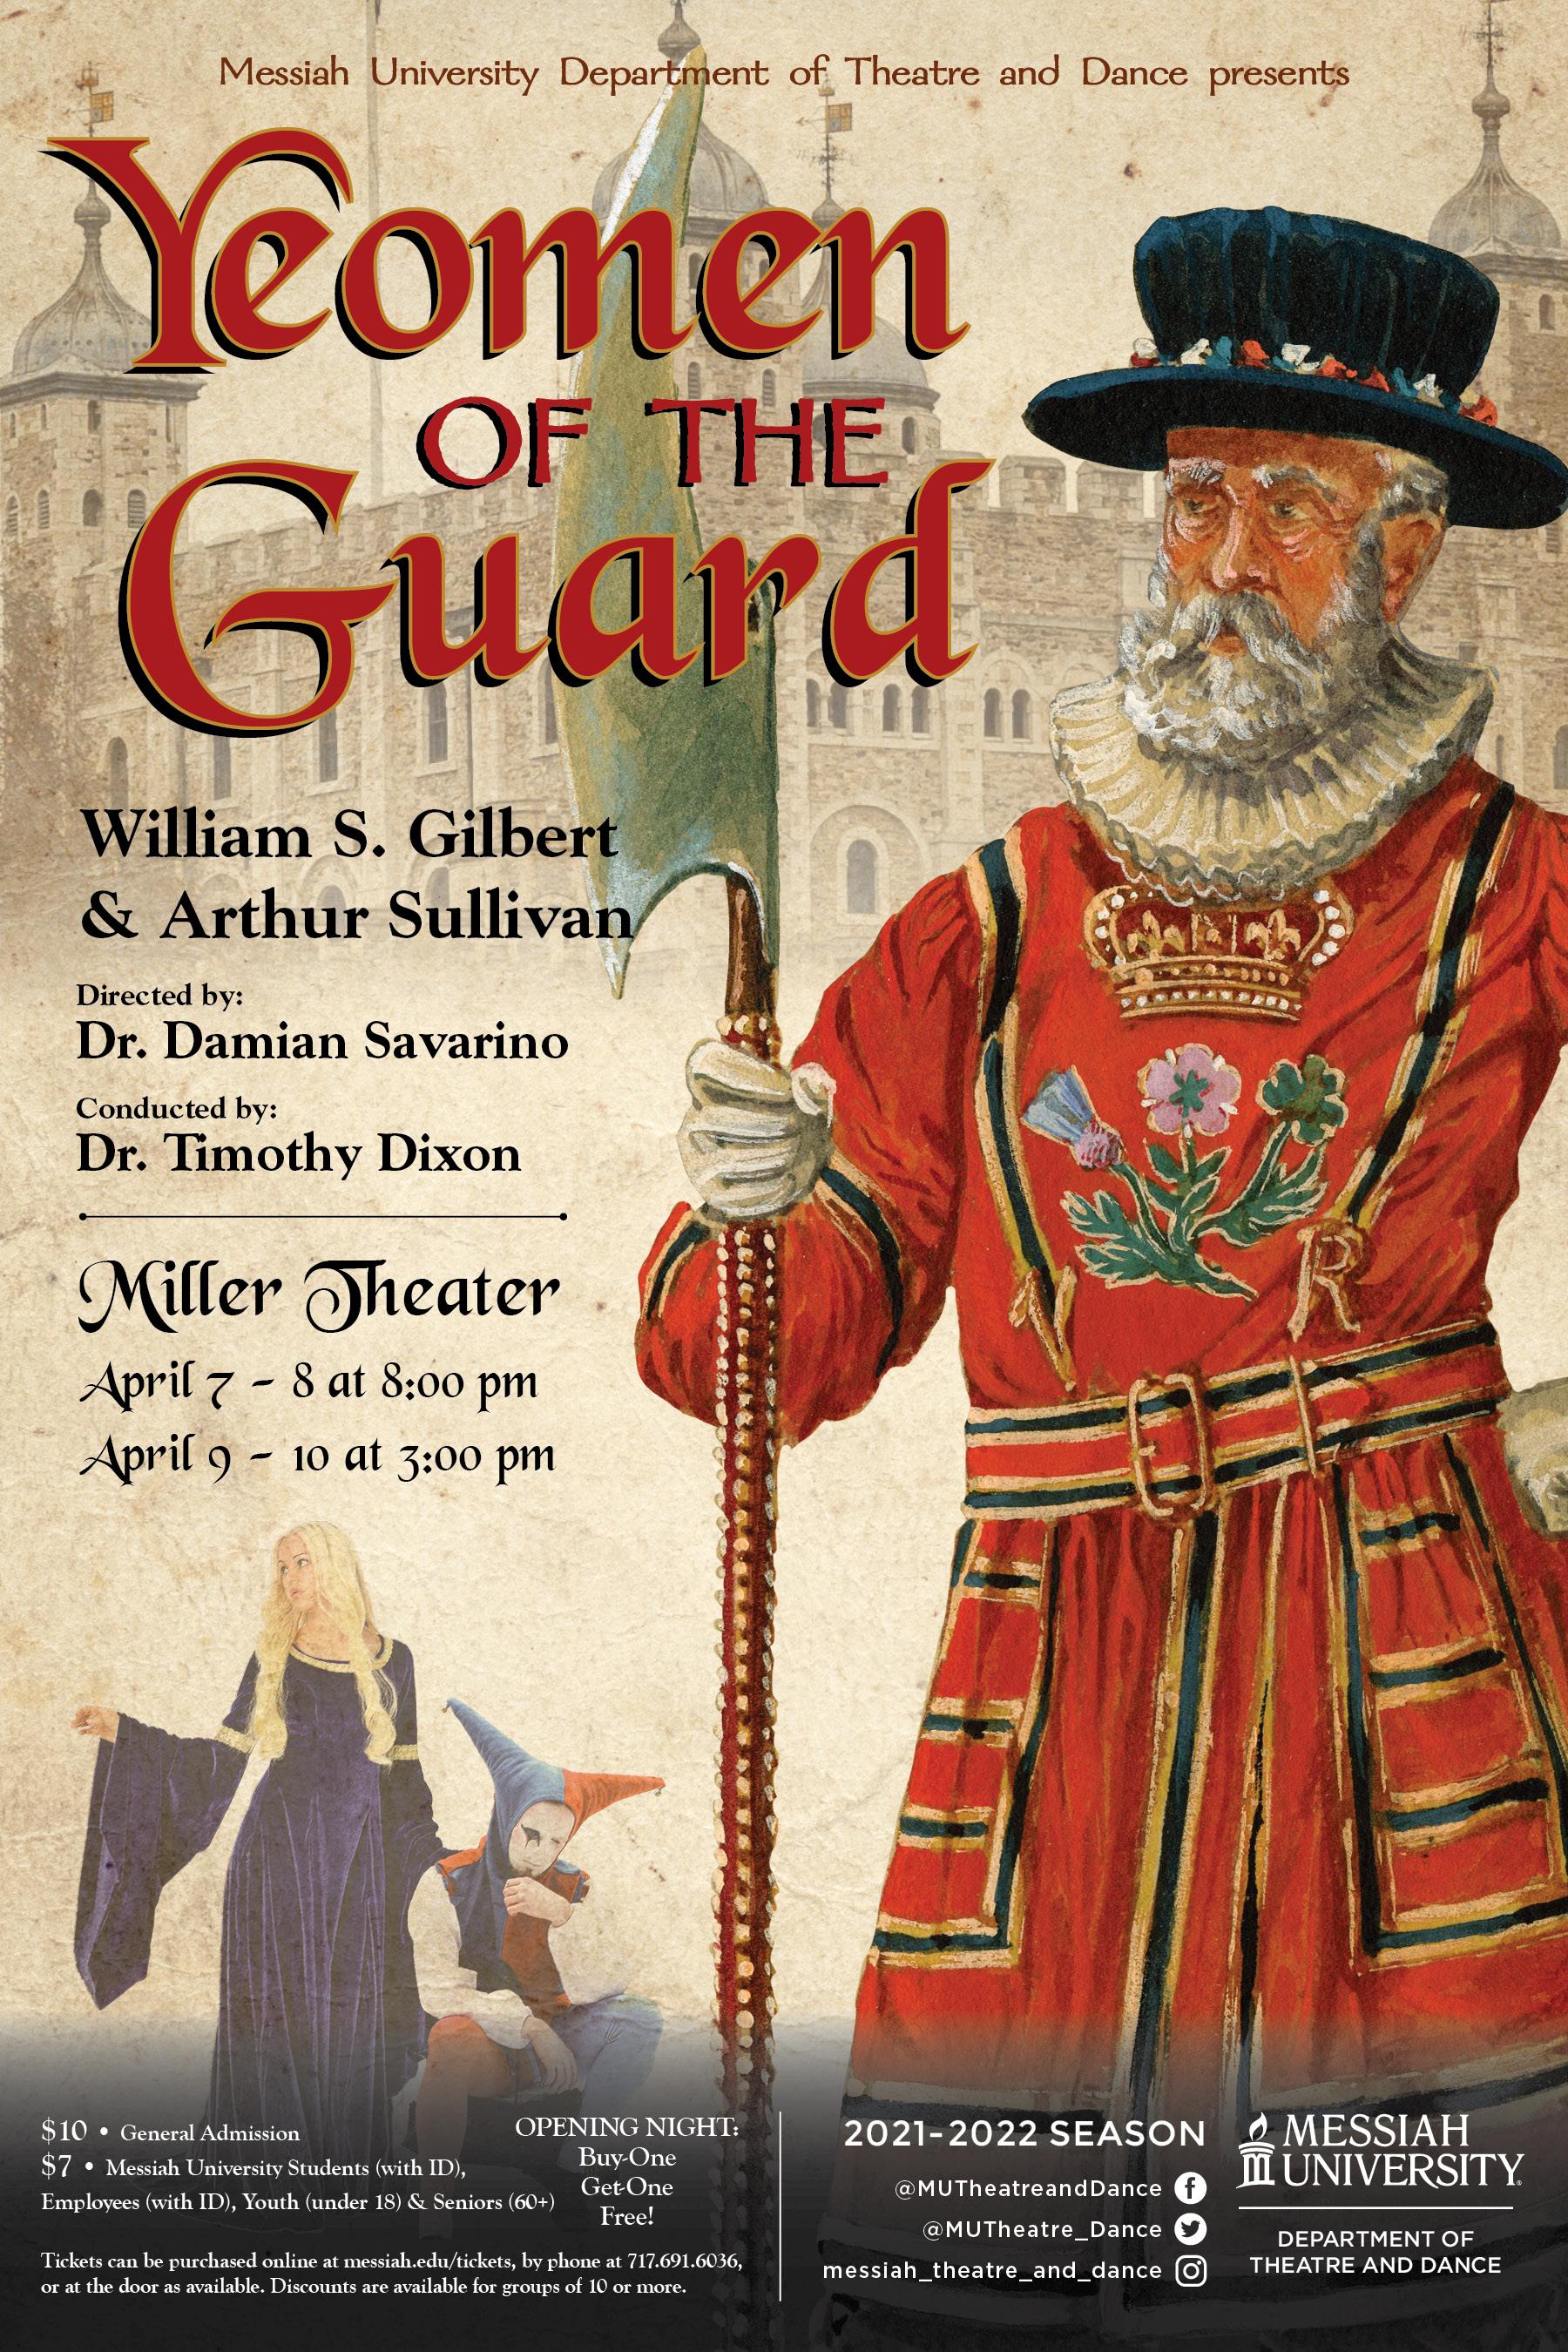 Yeomen of the guard poster